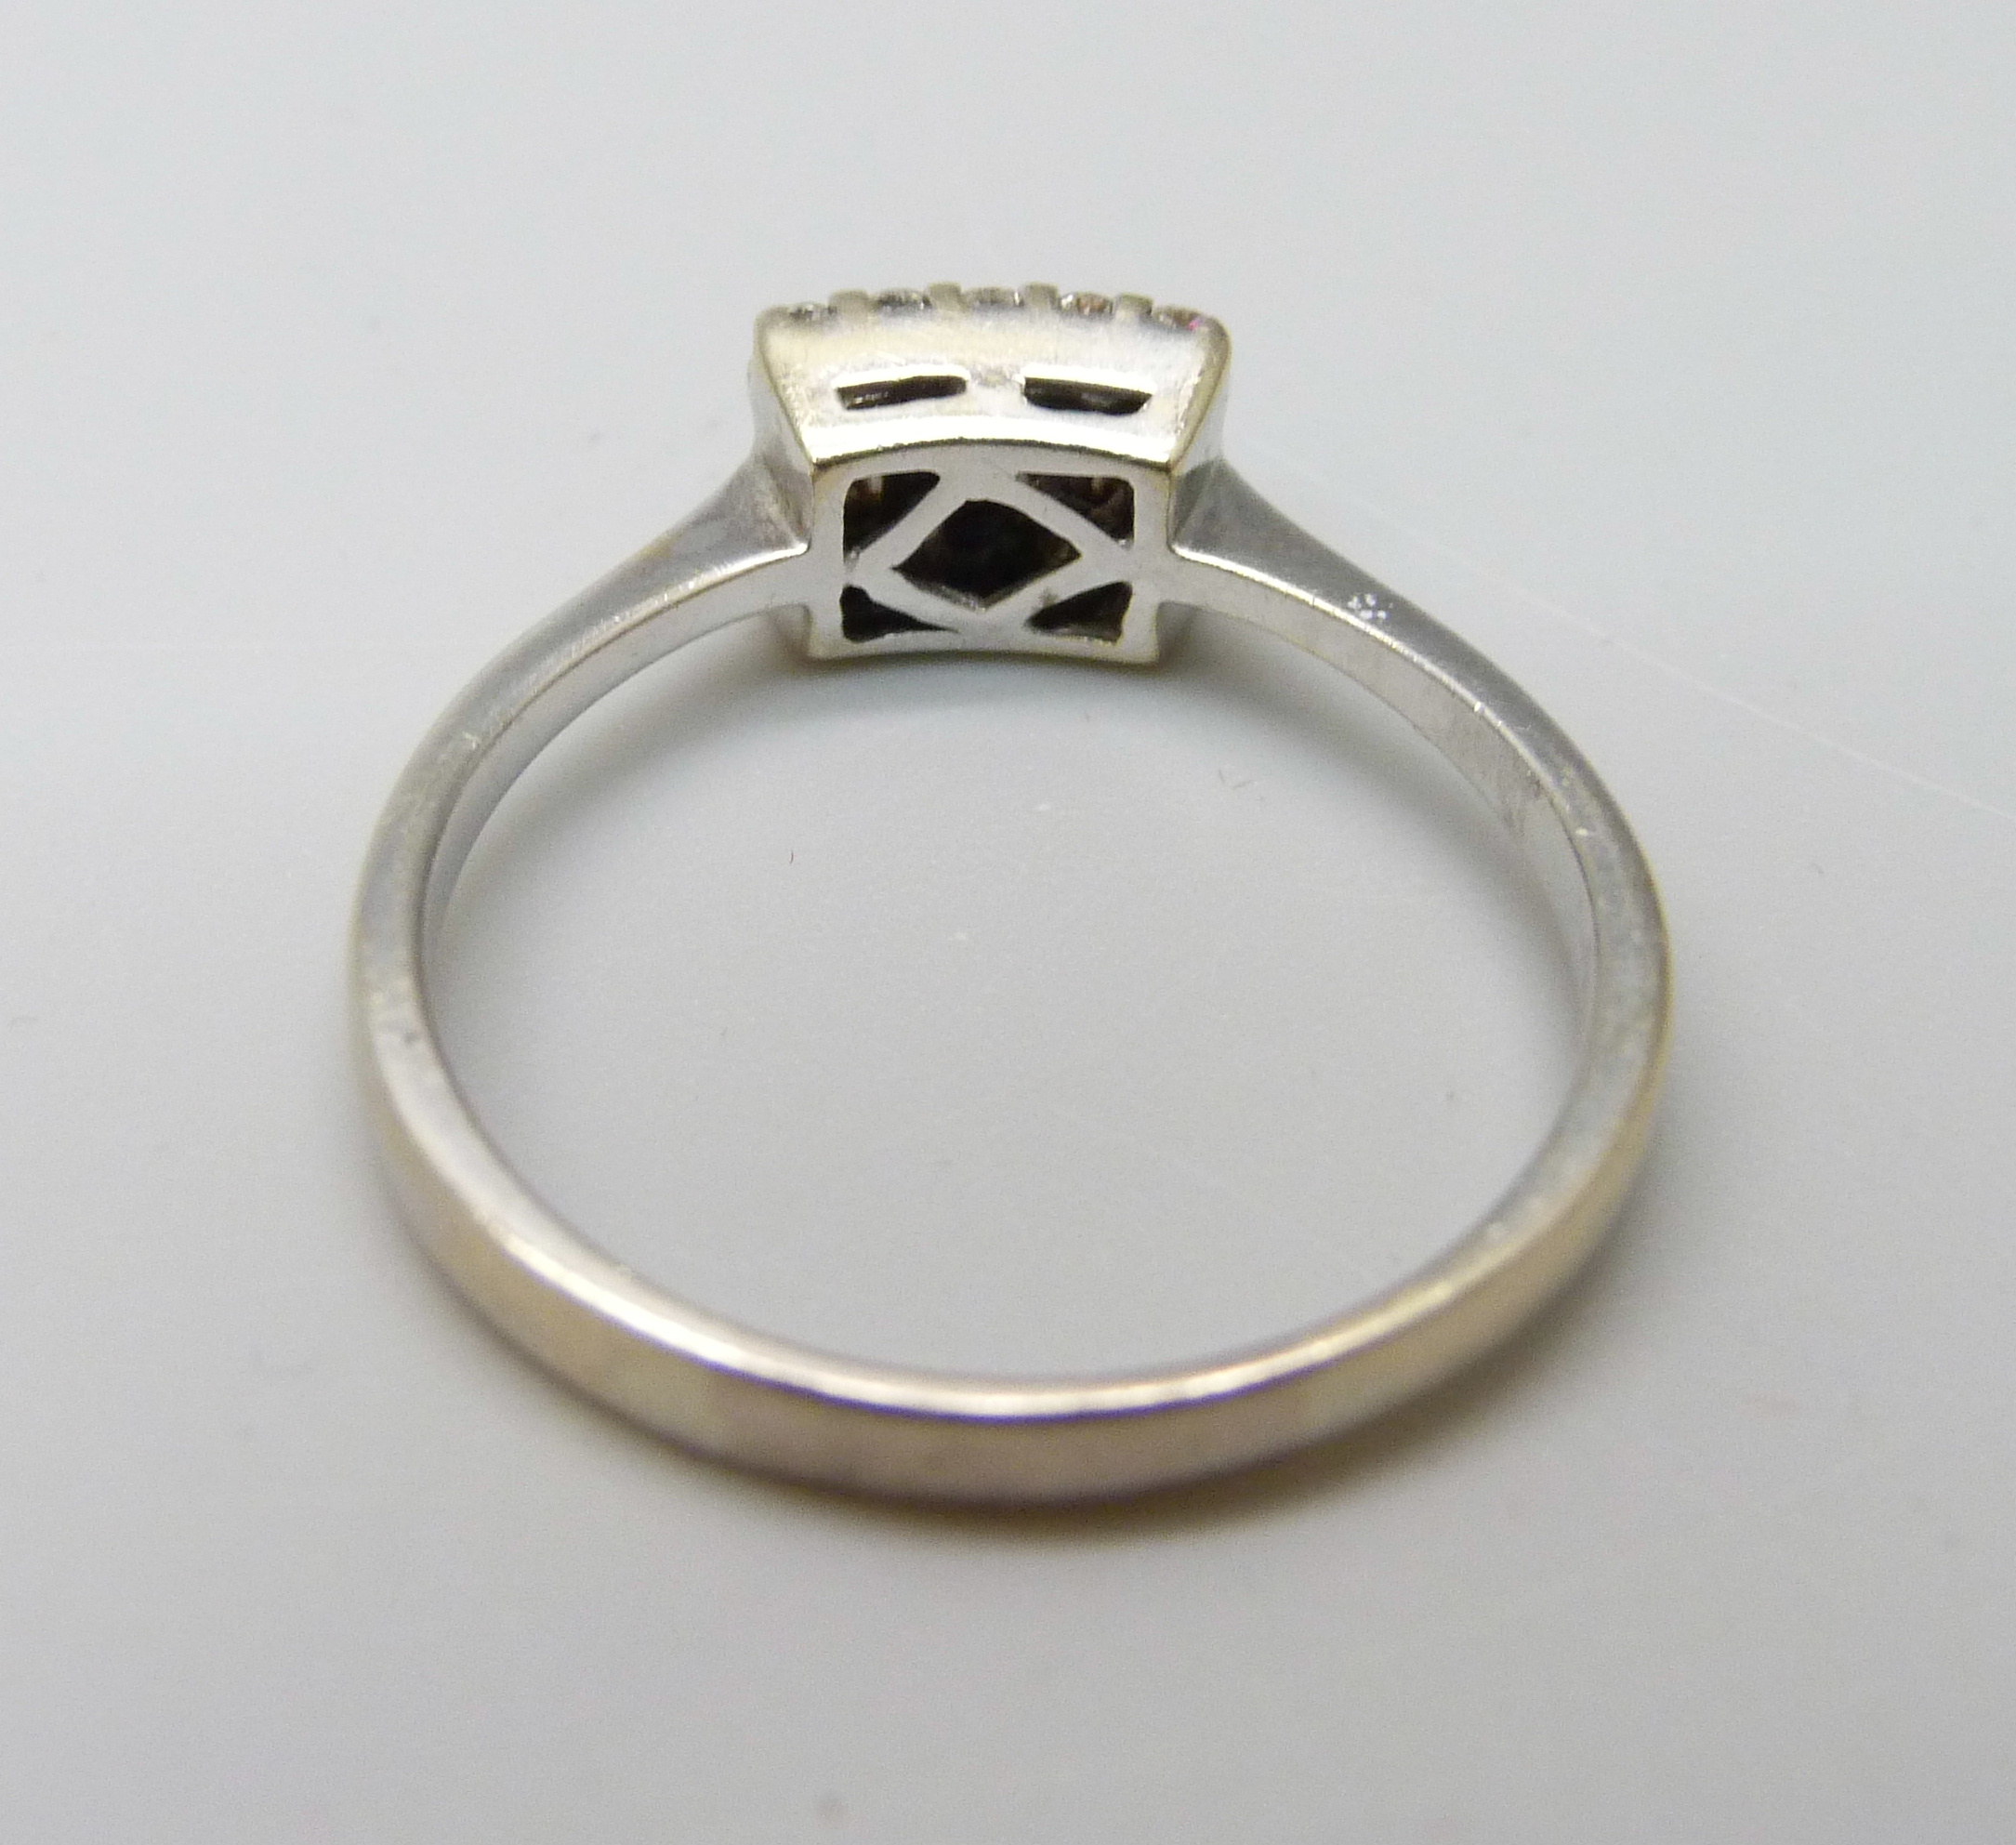 An 18ct white gold and diamond ring, 3.5g, R - Image 3 of 3